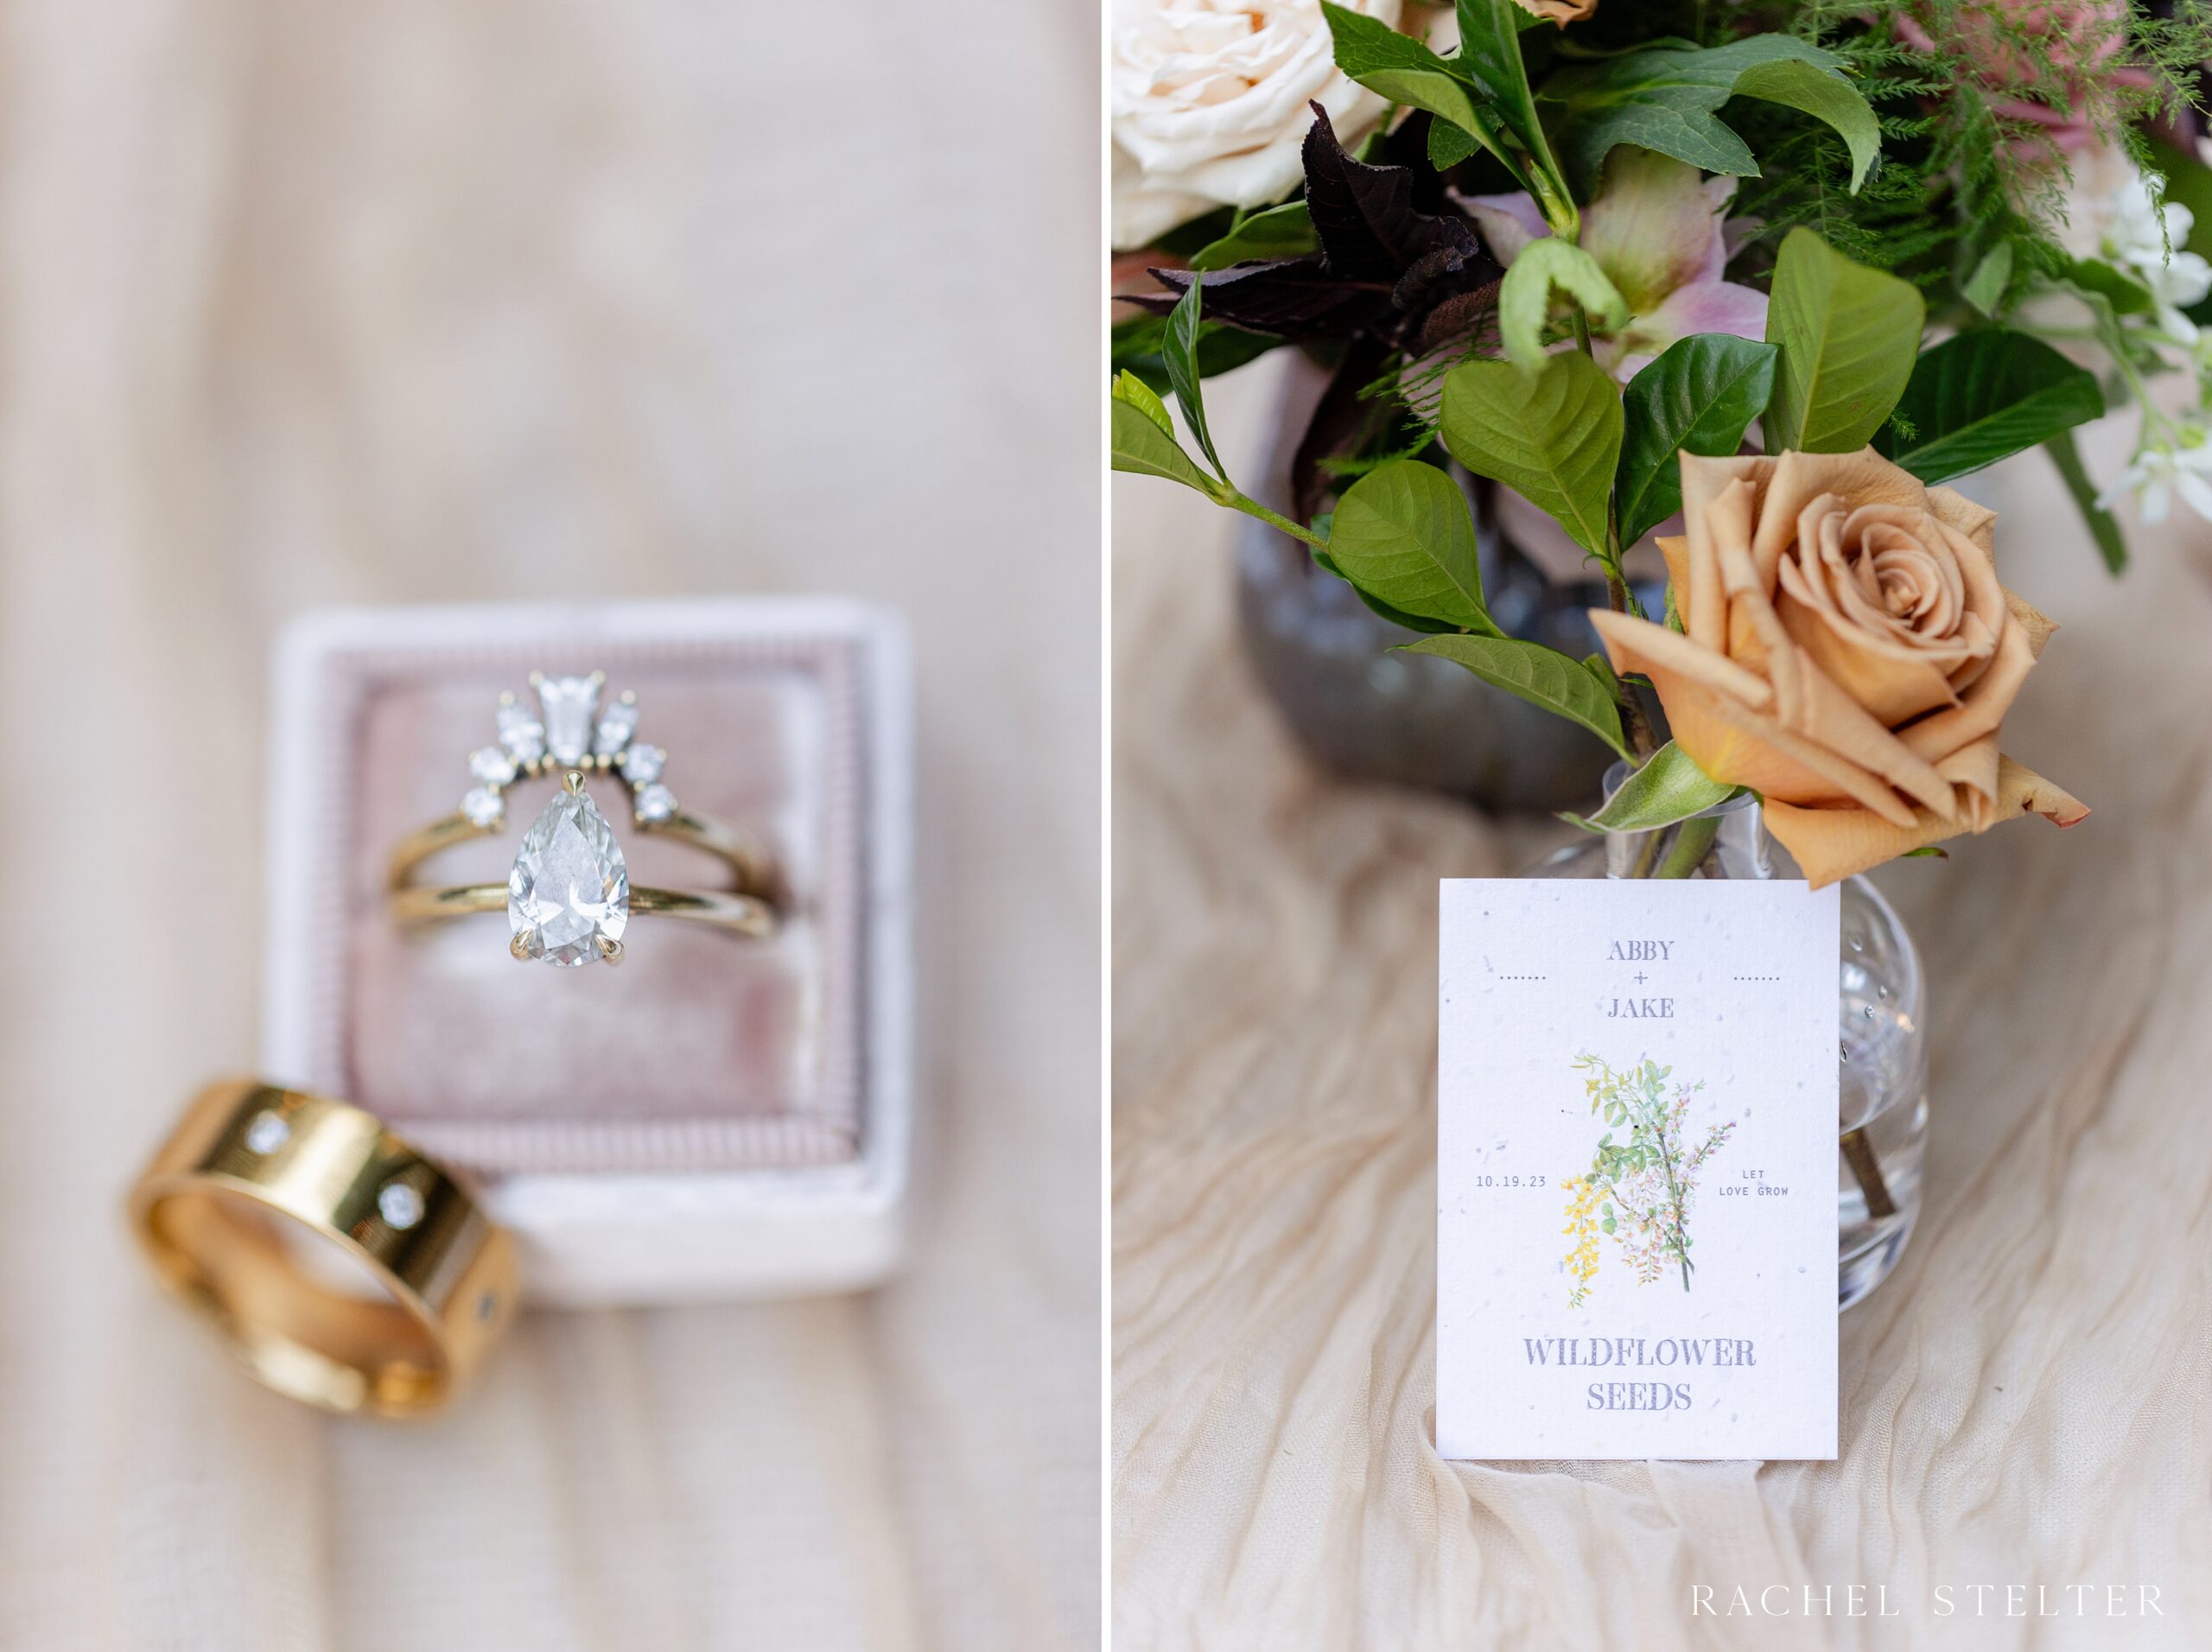 wedding rings and party favors for intimate DTLA wedding